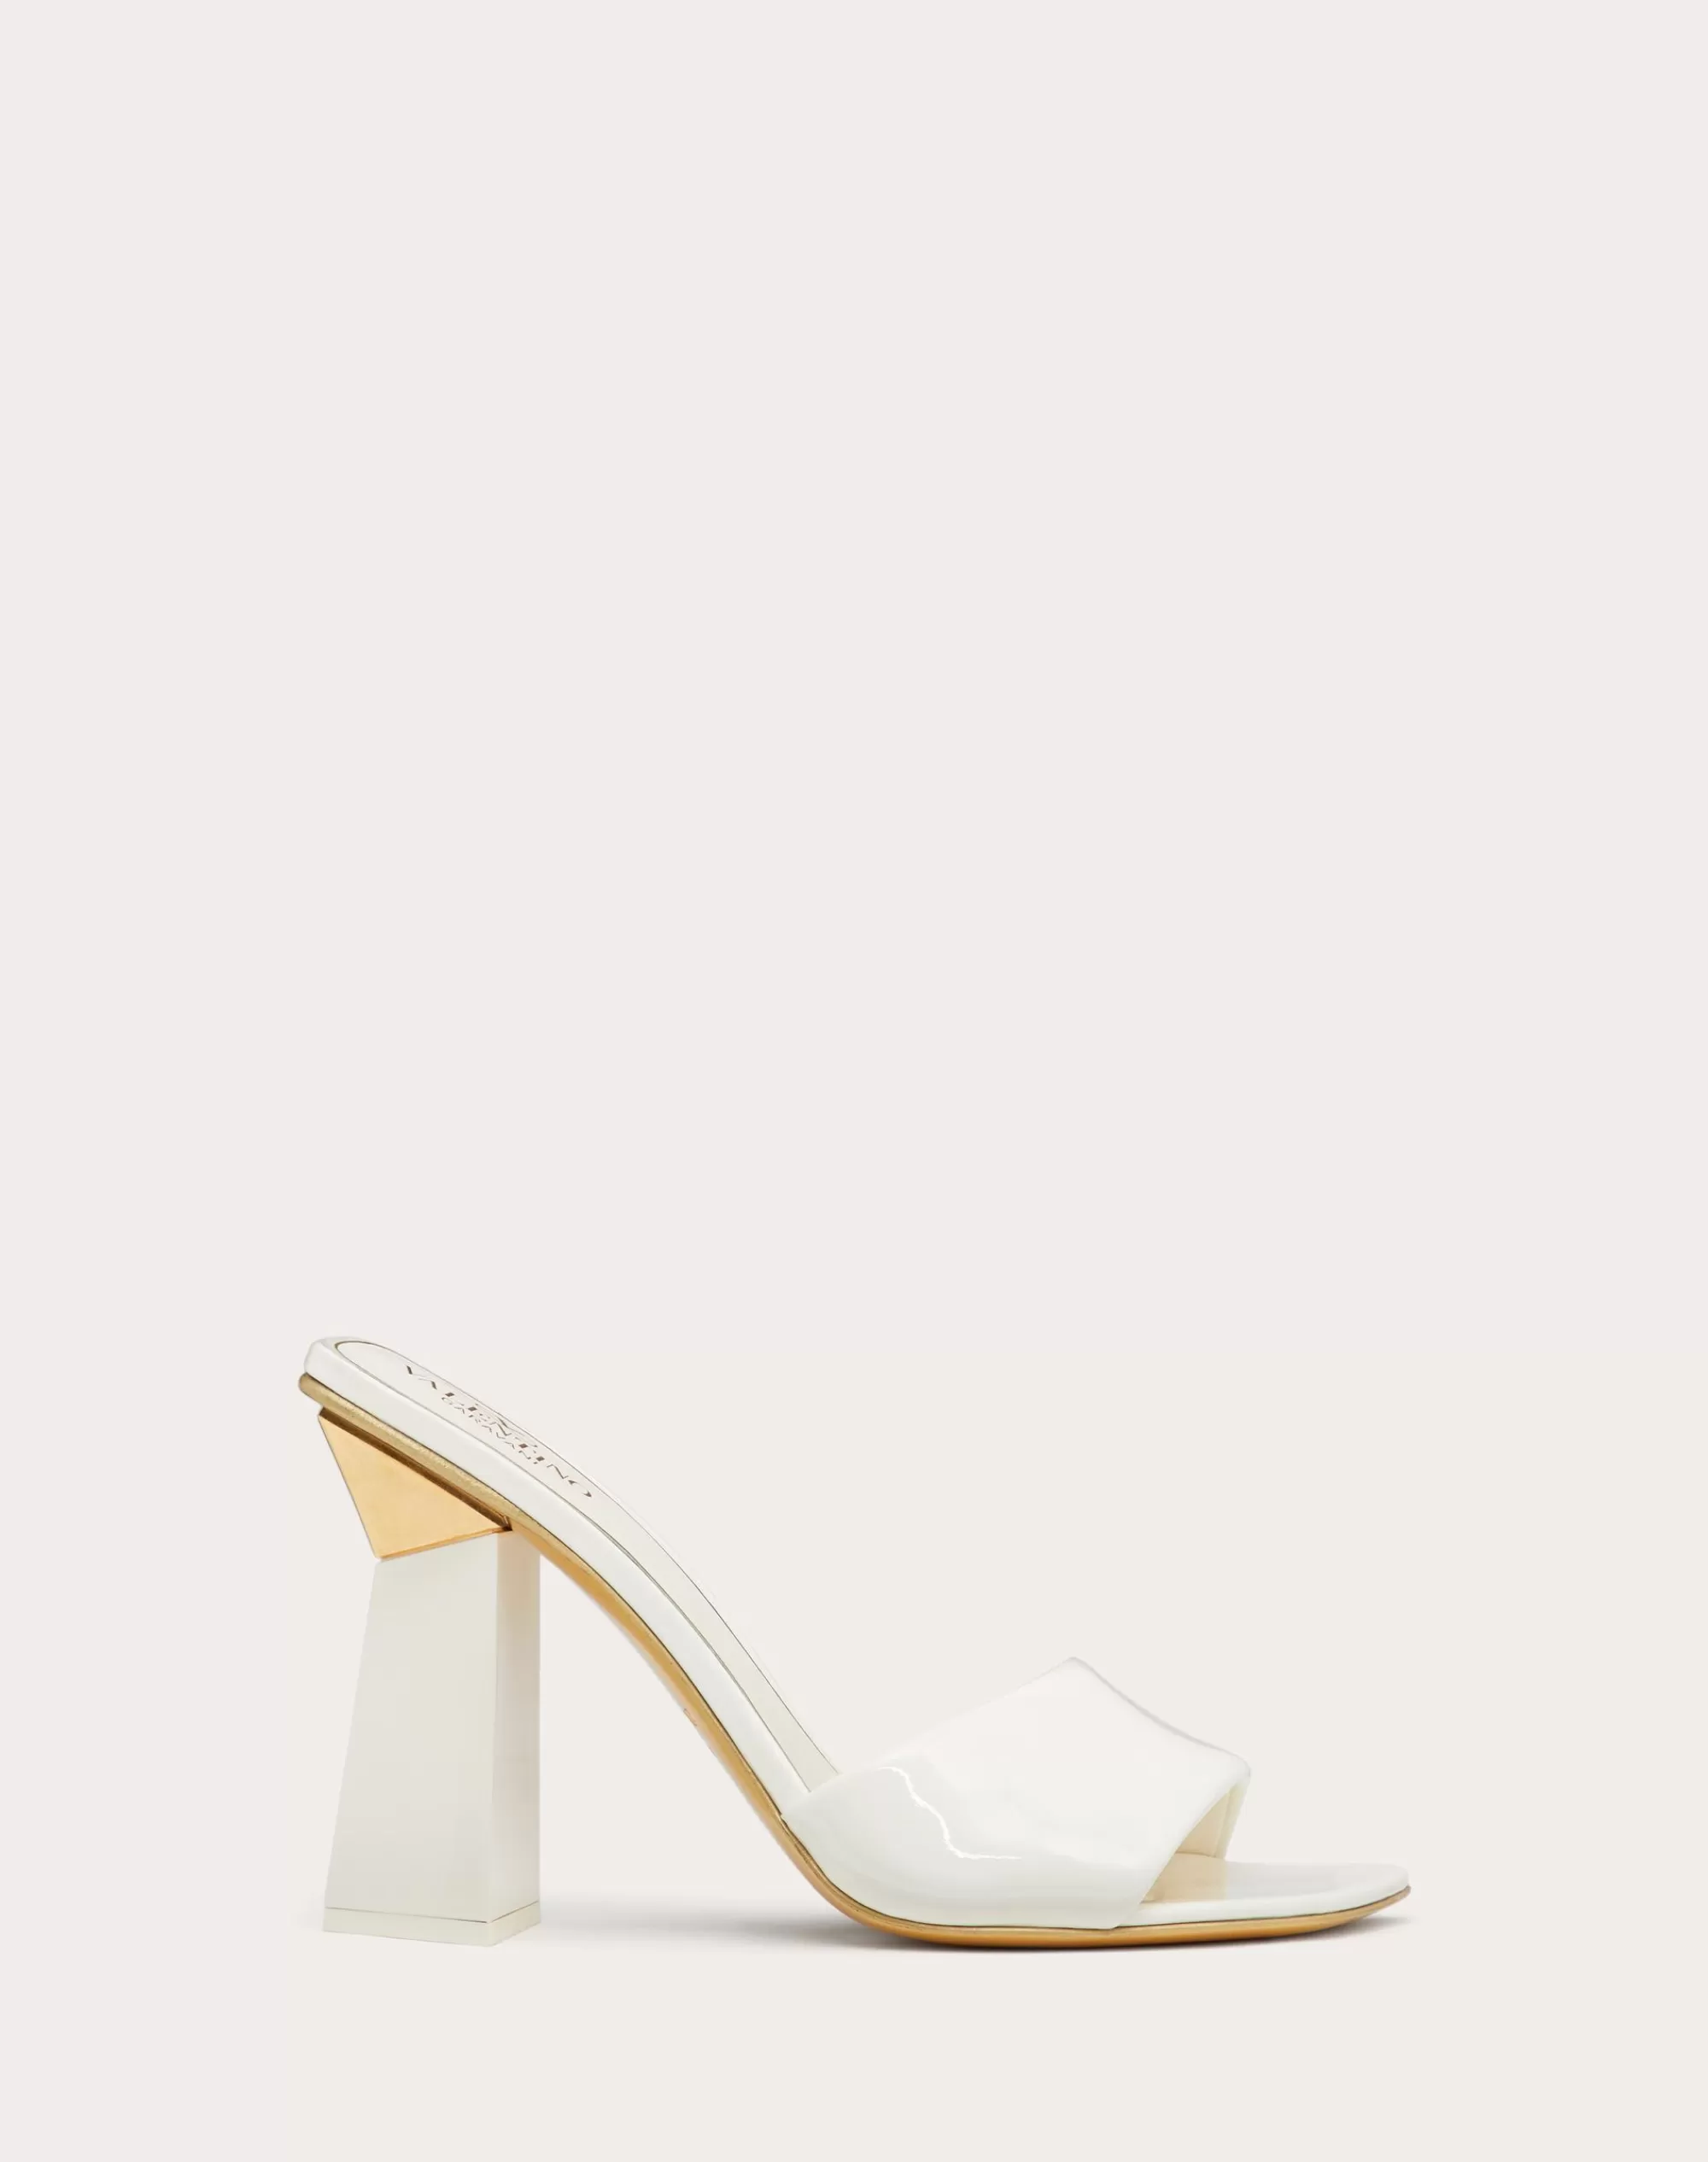 Valentino ONE STUD HYPER SLIDE SANDAL IN PATENT LEATHER 105MM Sale